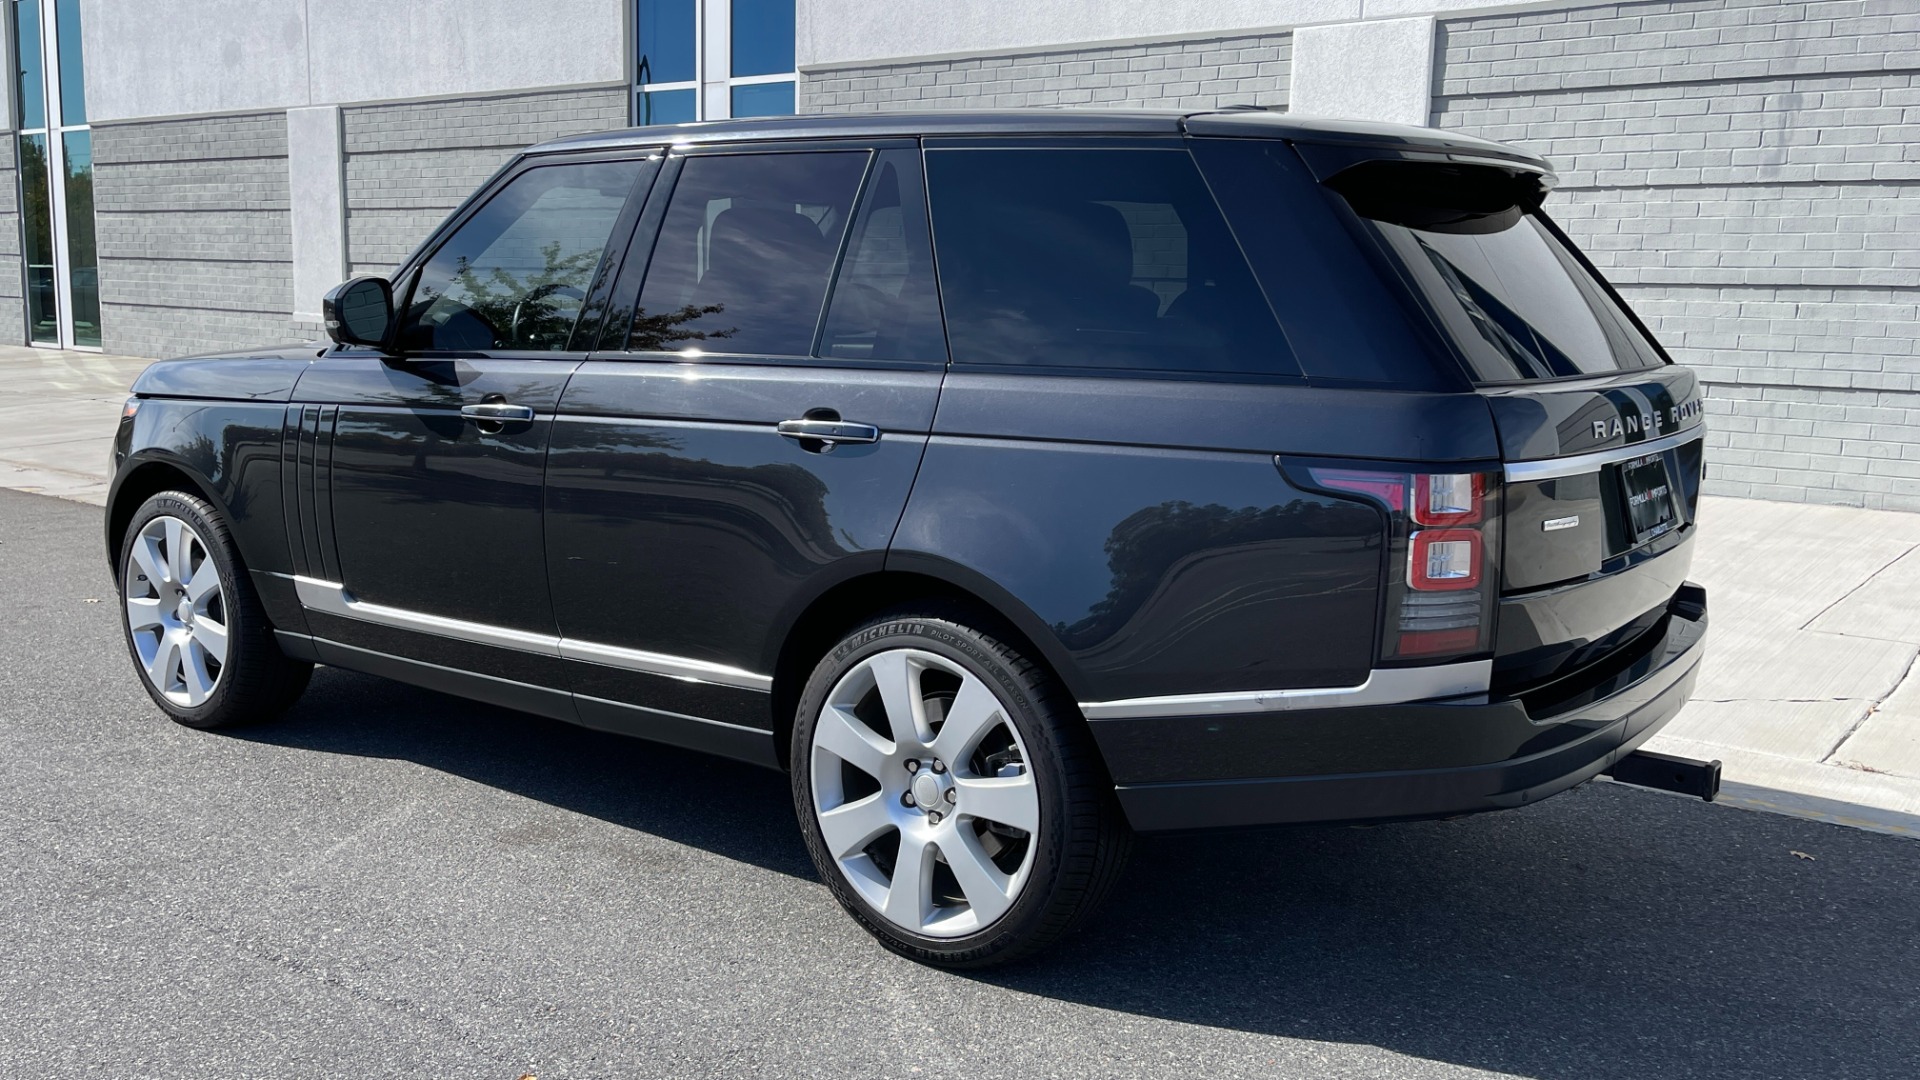 Used 2014 Land Rover Range Rover Supercharged Autobiography / 22IN WHEELS / PREMIUM PAINT / MASSAGE for sale $42,975 at Formula Imports in Charlotte NC 28227 2